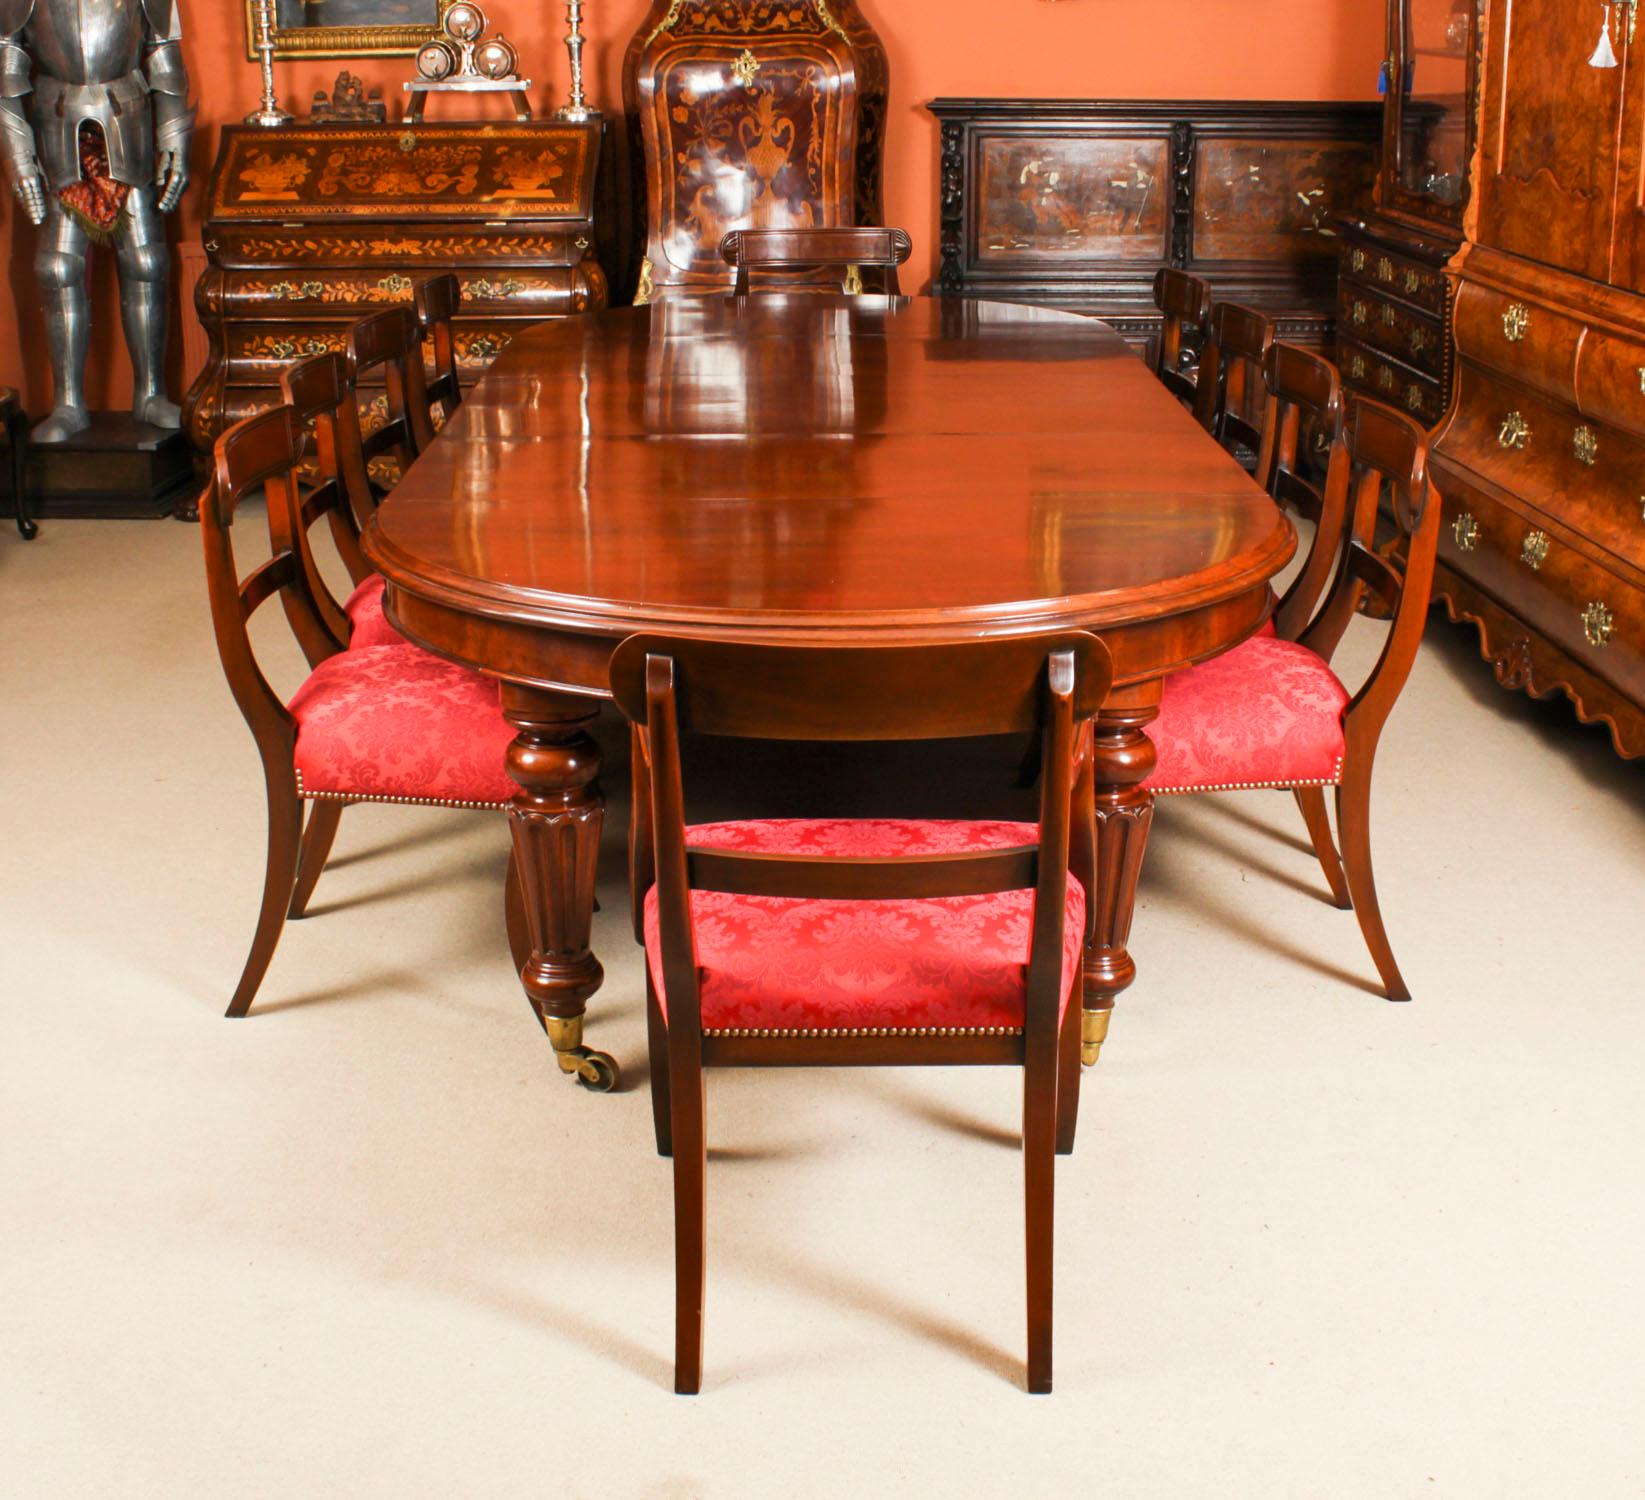 This is a fabulous antique Victorian oval flame mahogany extending dining table, circa 1860 in date and ten Regency revival chairs. 

The table has three original leaves, can comfortably seat ten and has been hand-crafted from solid flame mahogany